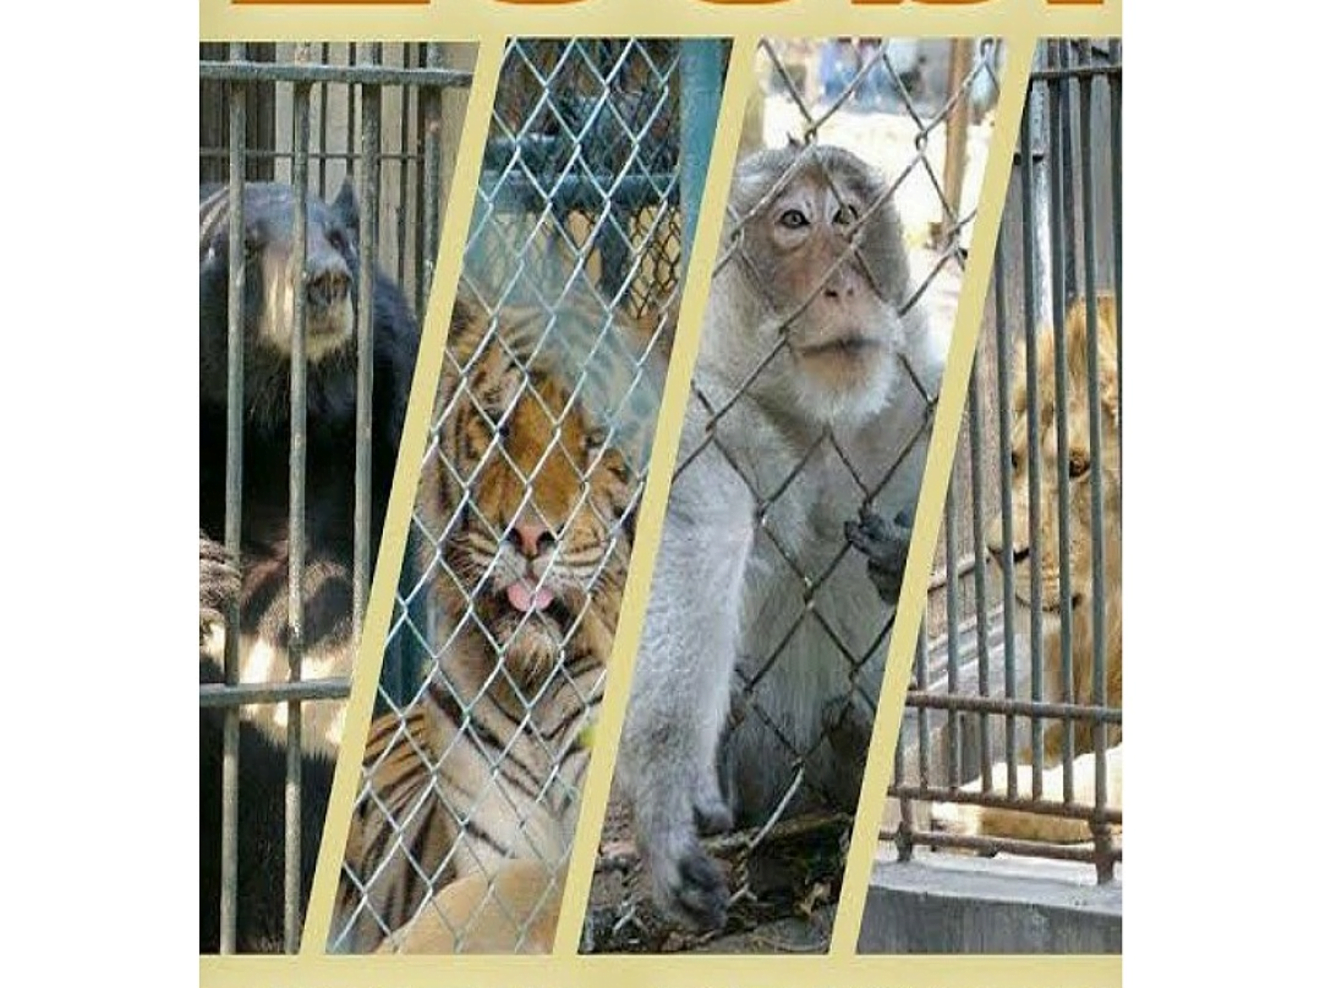 Zoos Are Pitiful Prisons